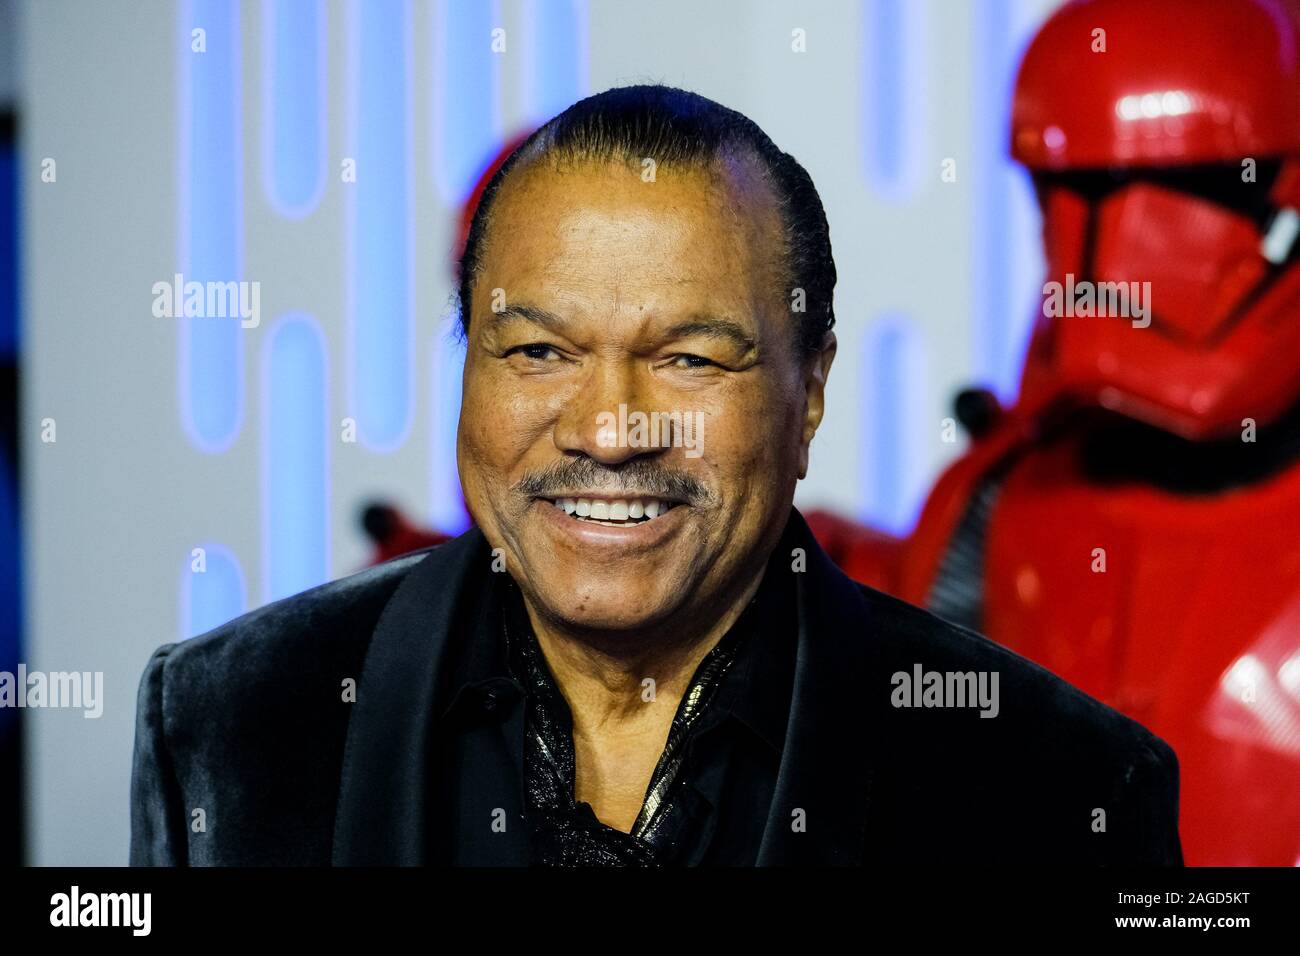 Cineworld Leicester Square, London, UK. 18 December 2019.  Billy Dee Williams poses at European Premier of Star Wars: The Rise of Skywalker. . Picture by Julie Edwards./Alamy Live News Stock Photo